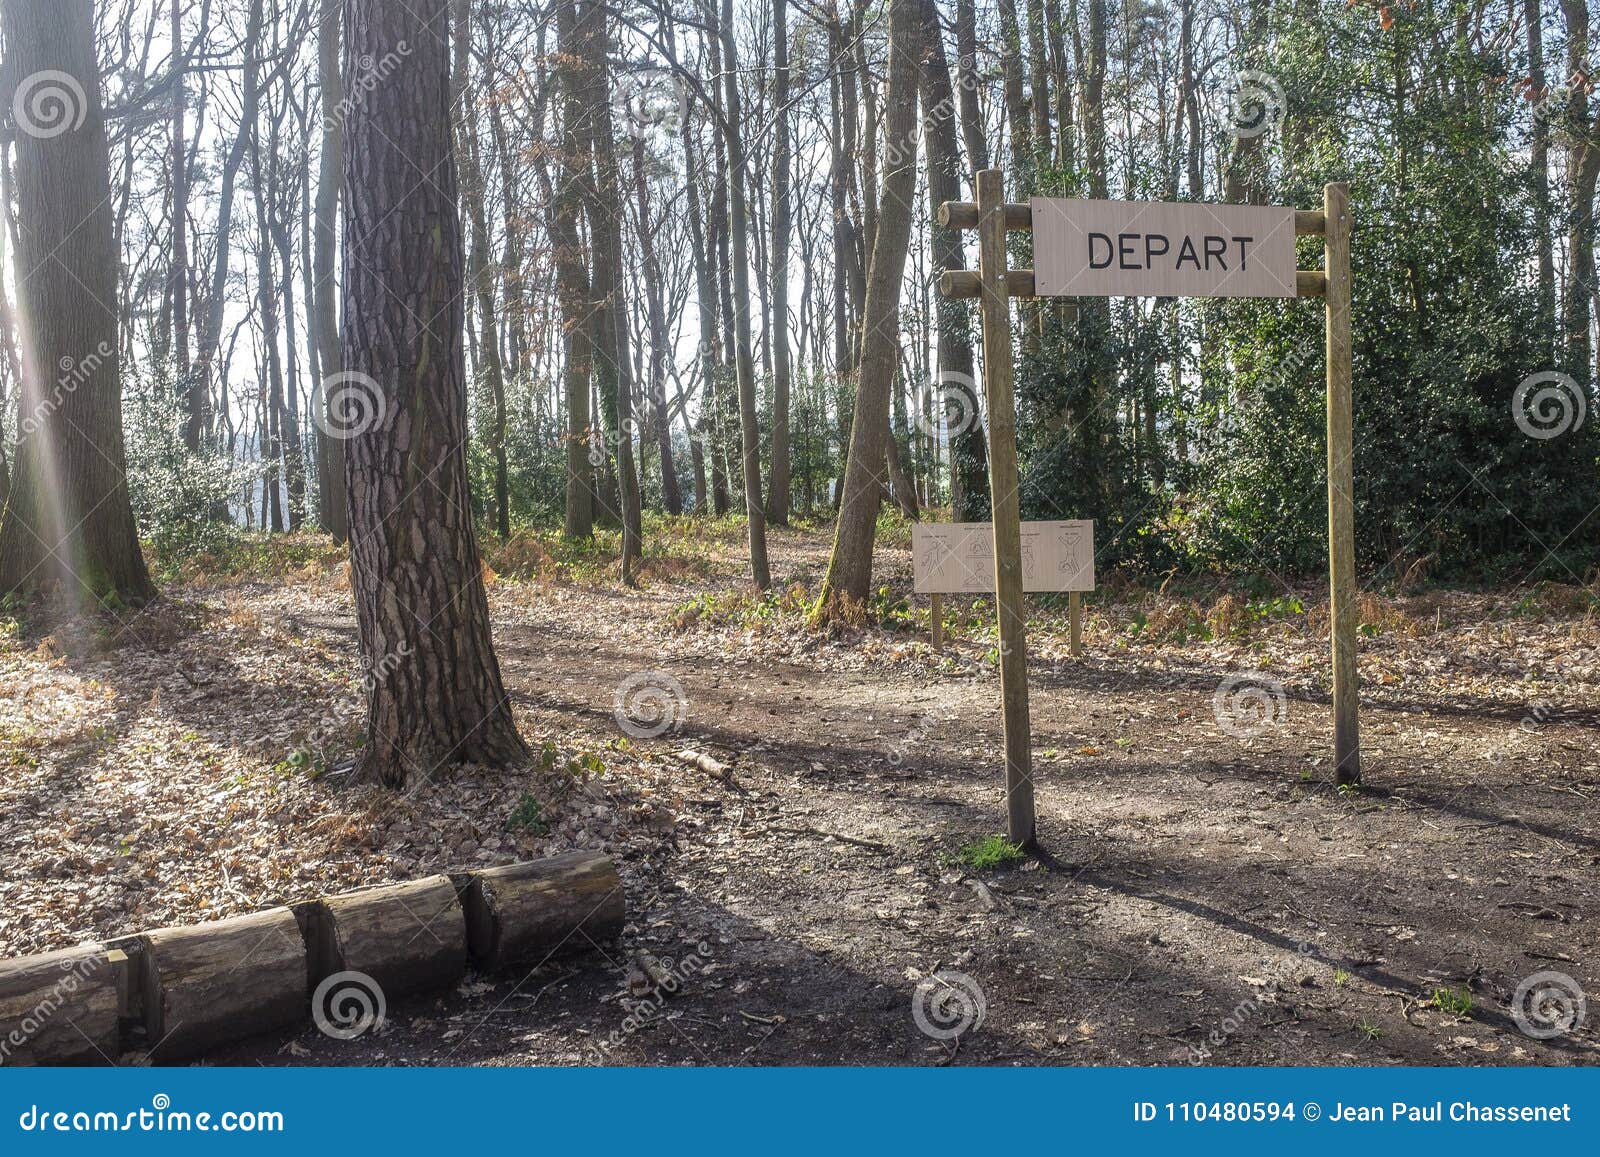 fitness training in forest. sign planted in a forest that indicates `depart, start`